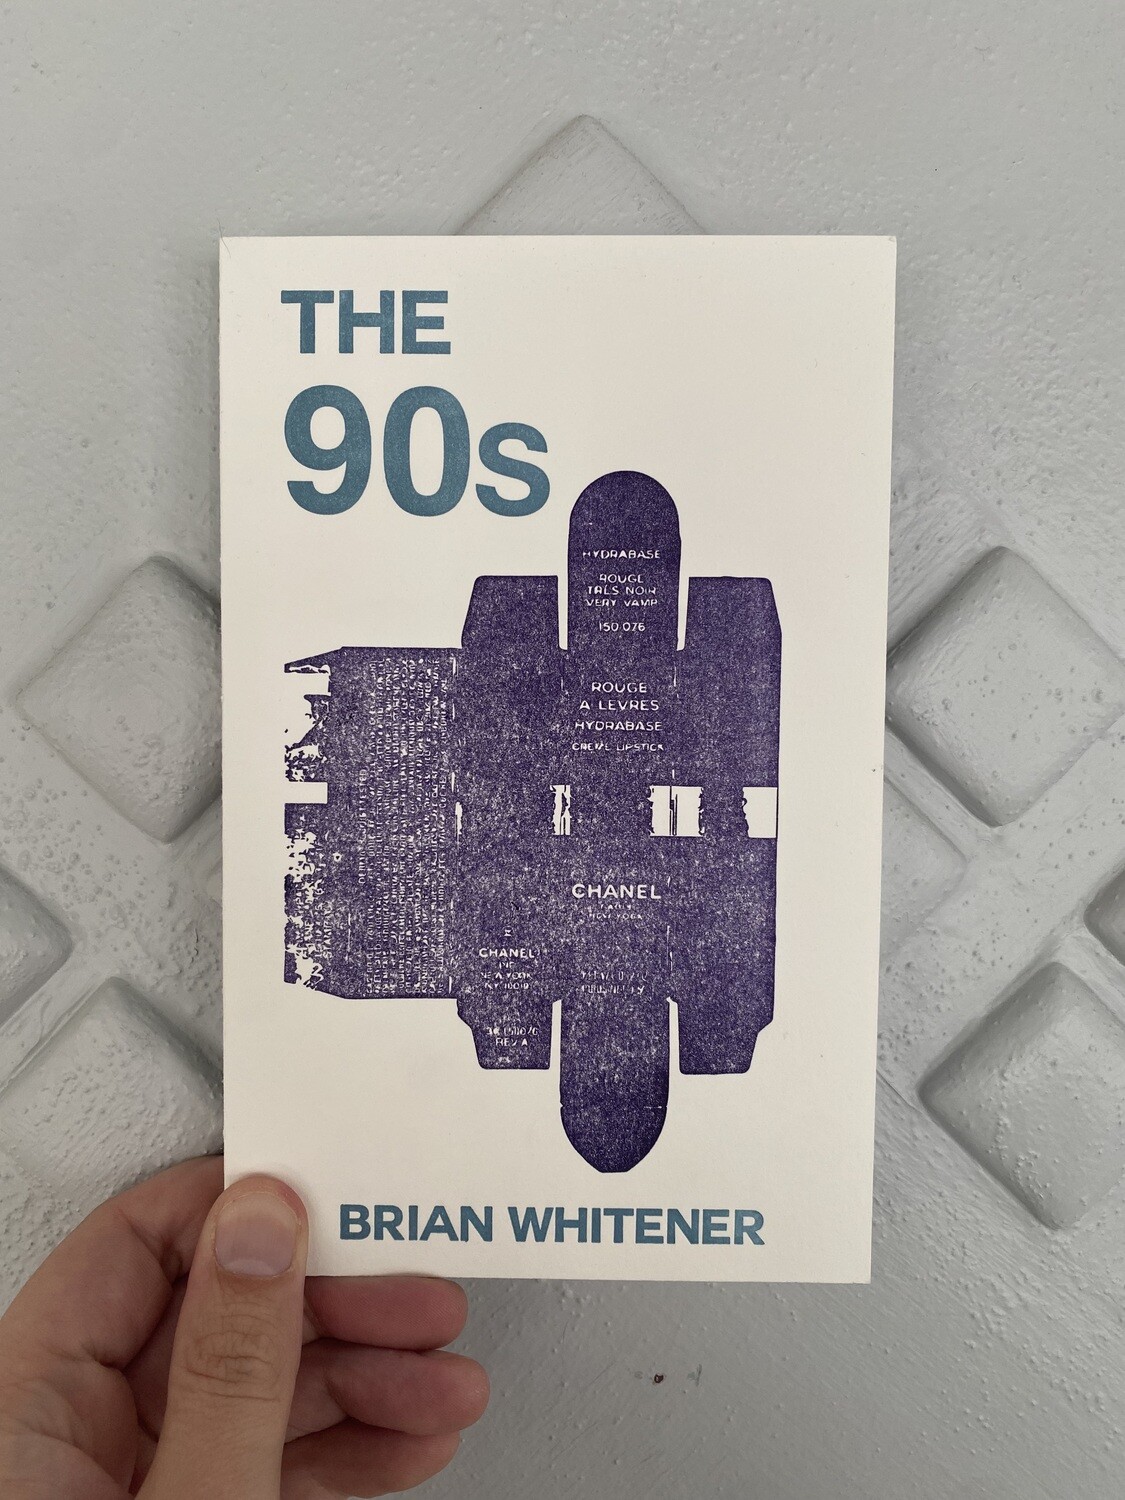 The 90s by Brian Whitener